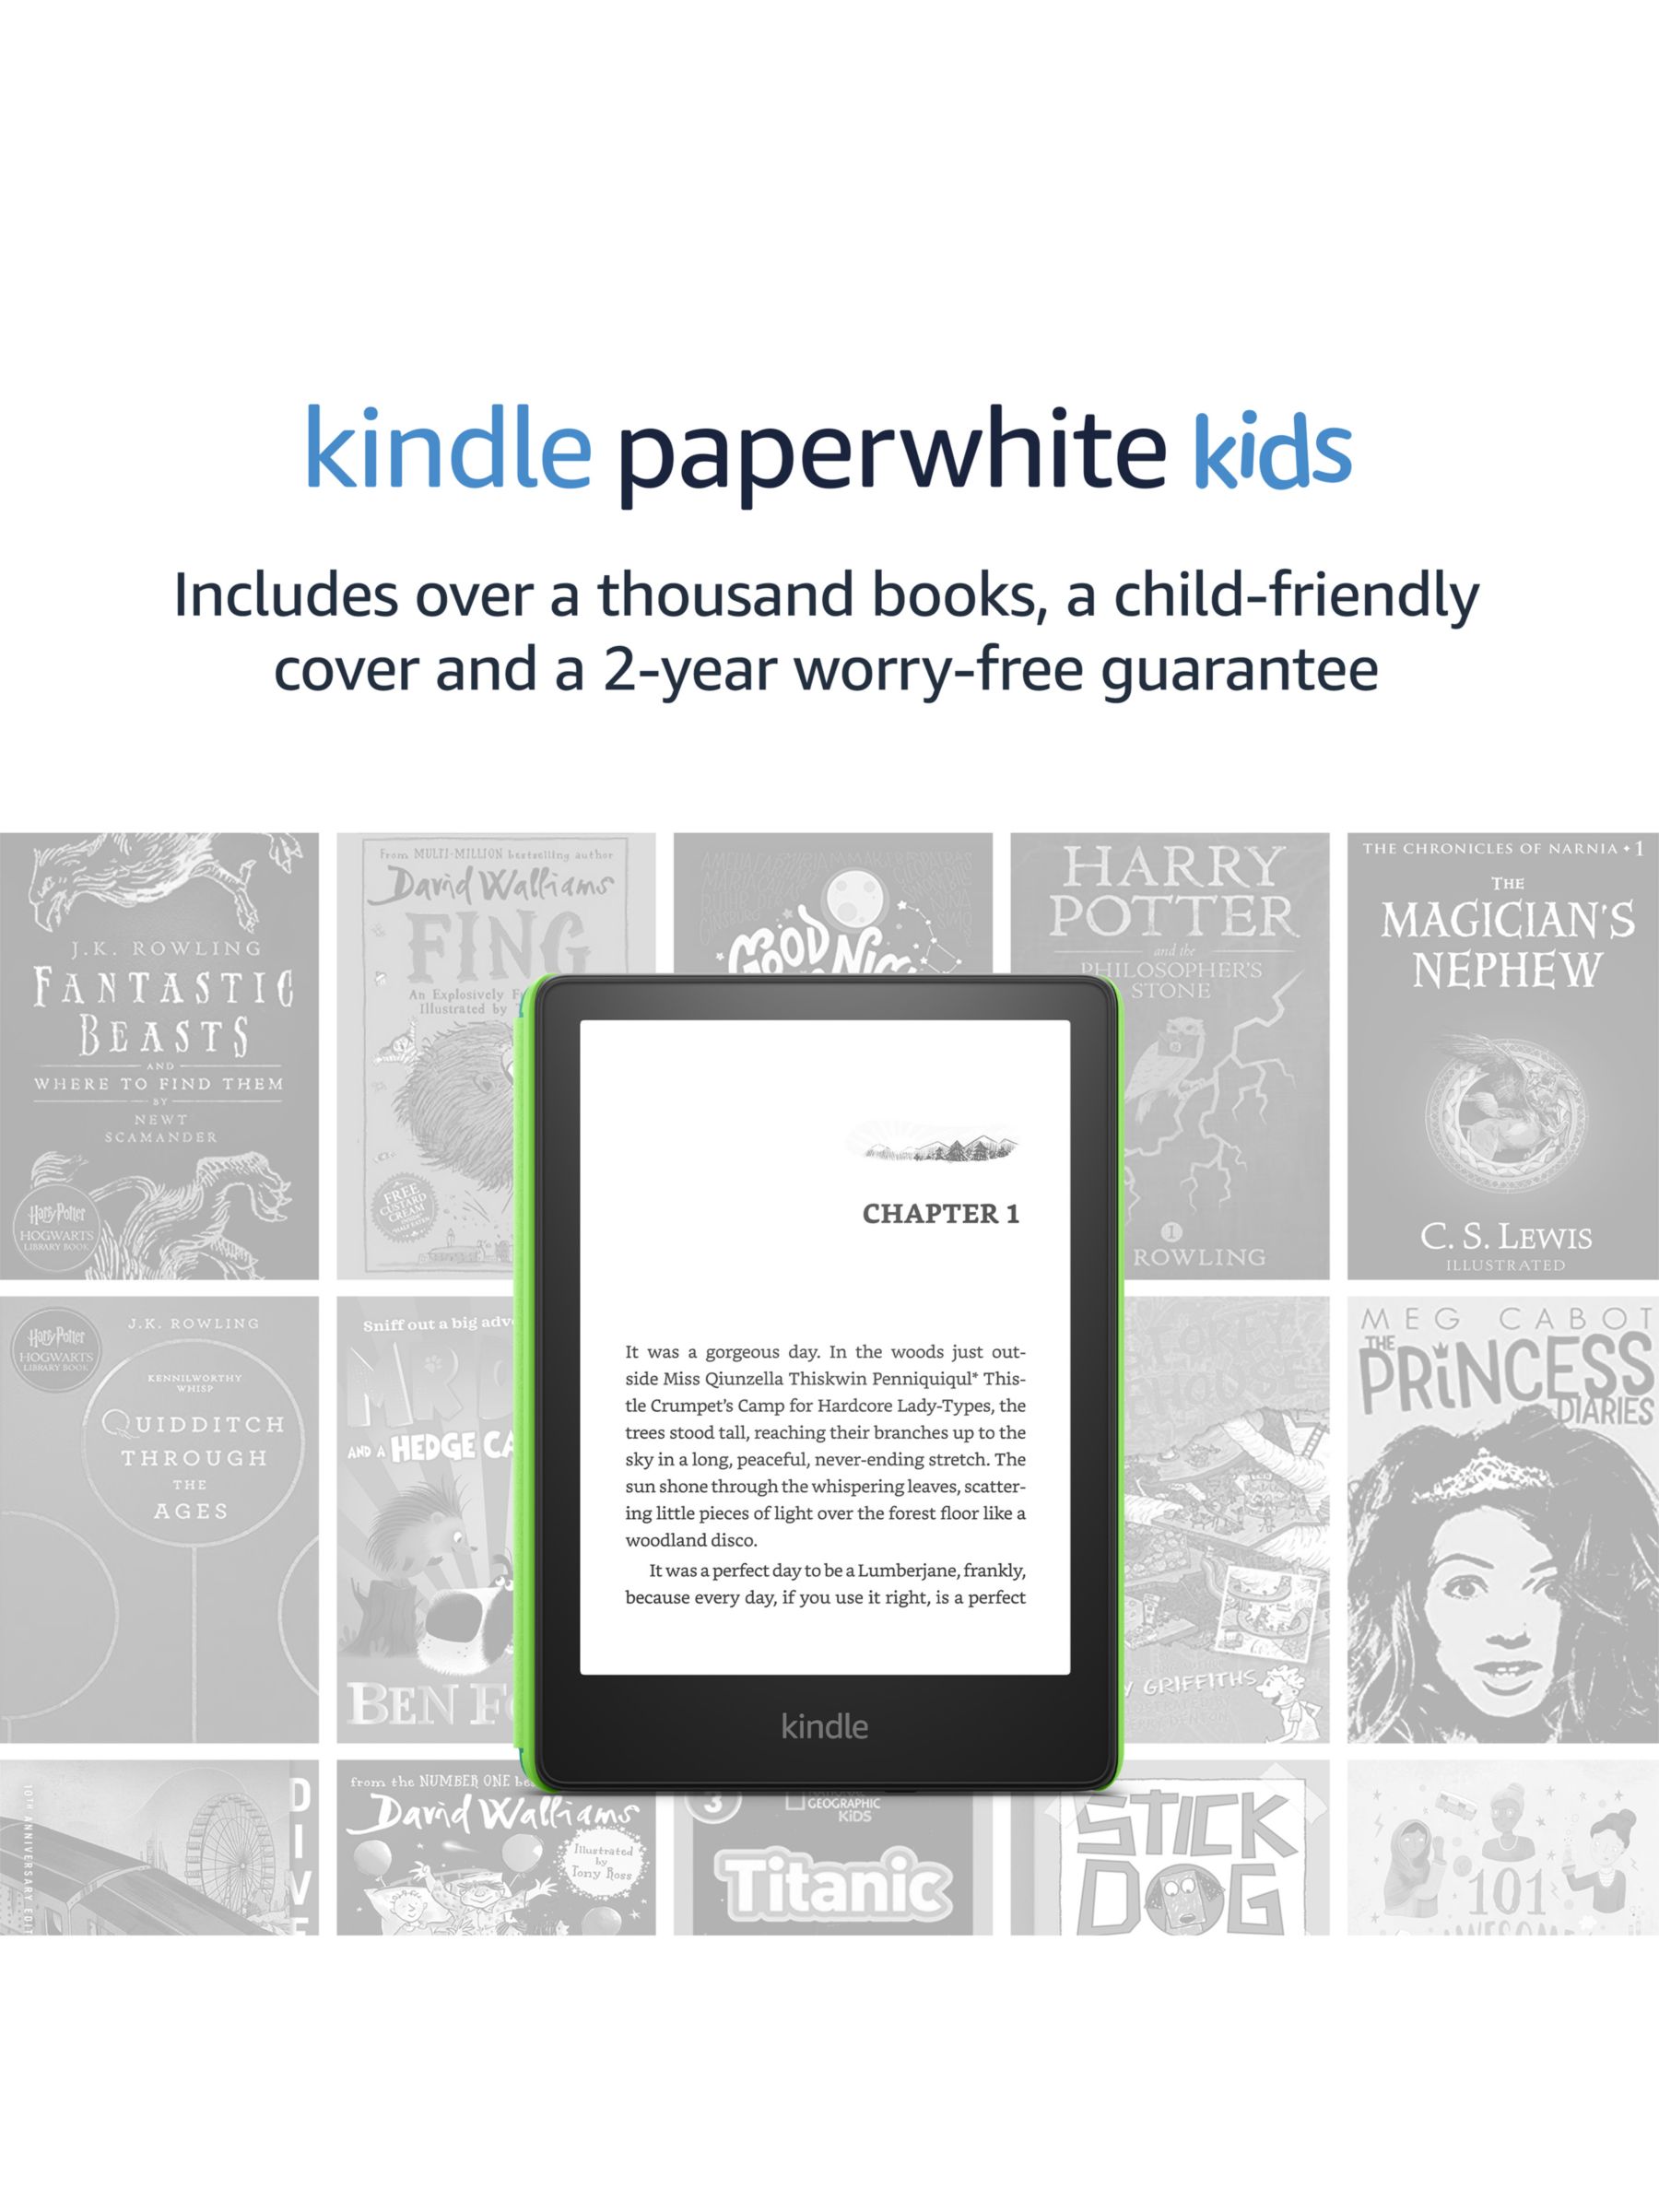 Kindle Paperwhite (11th Generation), Waterproof eReader, 6.8 High  Resolution Illuminated Touch Screen with Adjustable Warm Light, 16GB, with